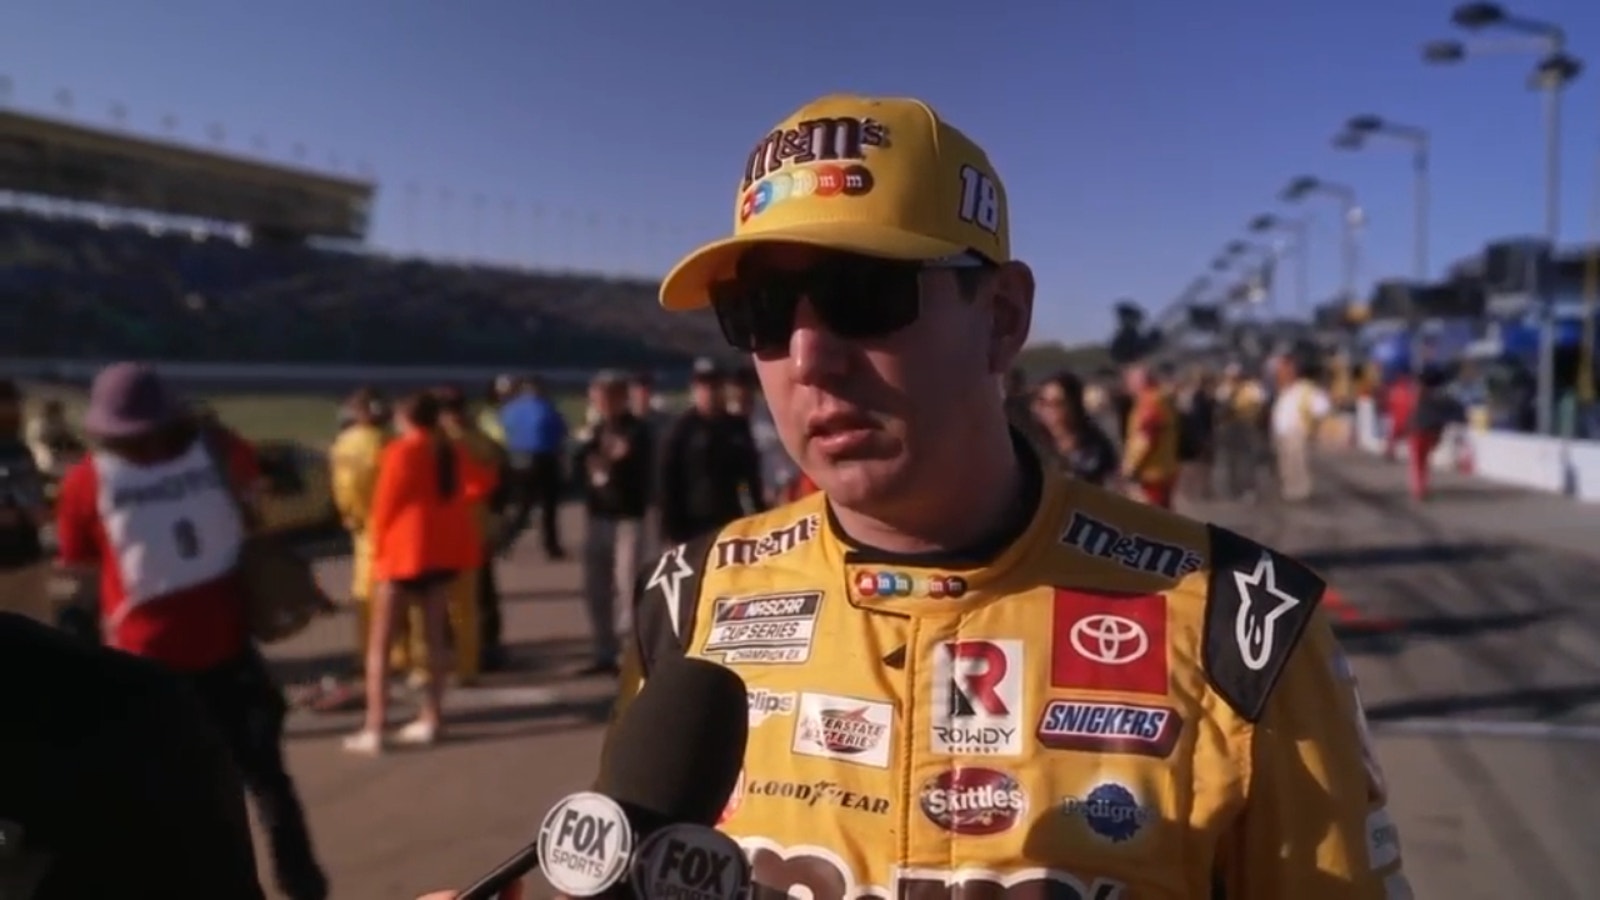 Kyle Busch on his spin and outlook on trying to advance at Bristol